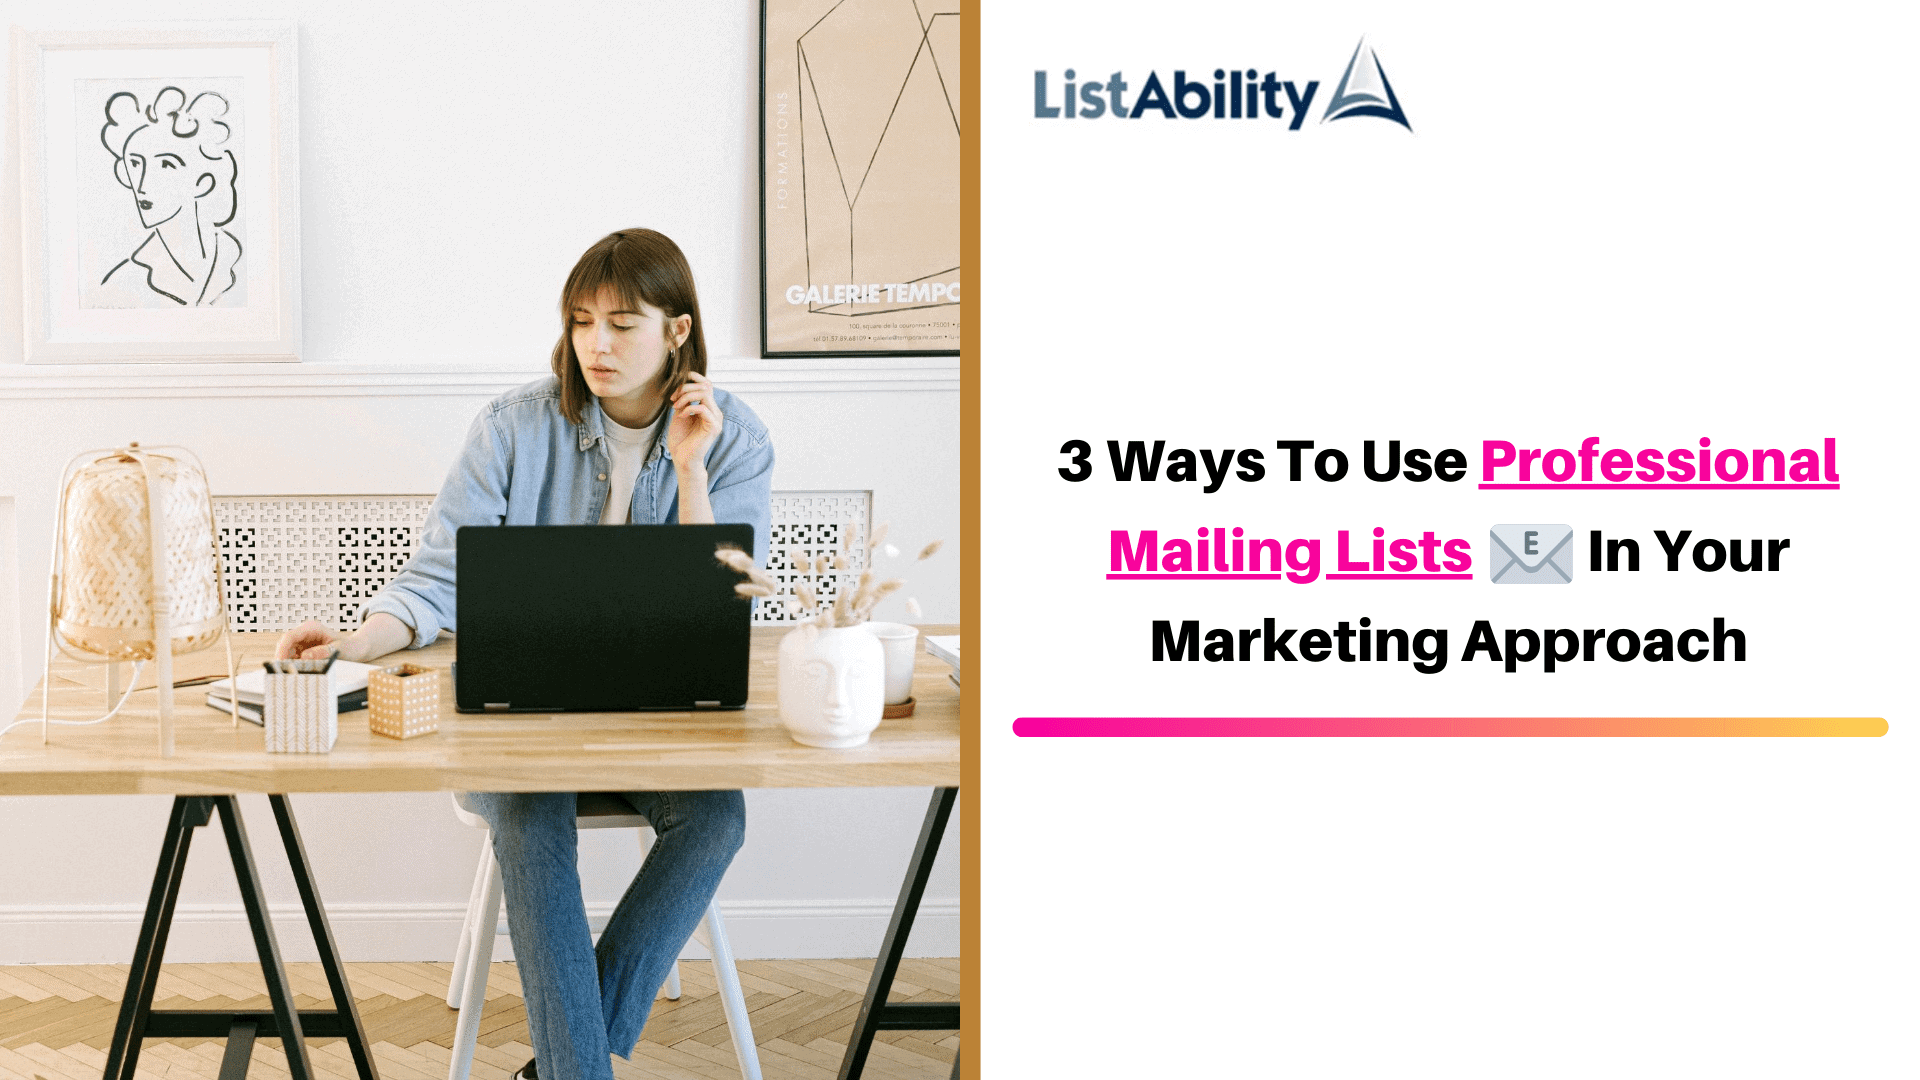 Professional Mailing Lists, DATA AND MARKETING SOLUTIONS FOR YOUR BUSINESS